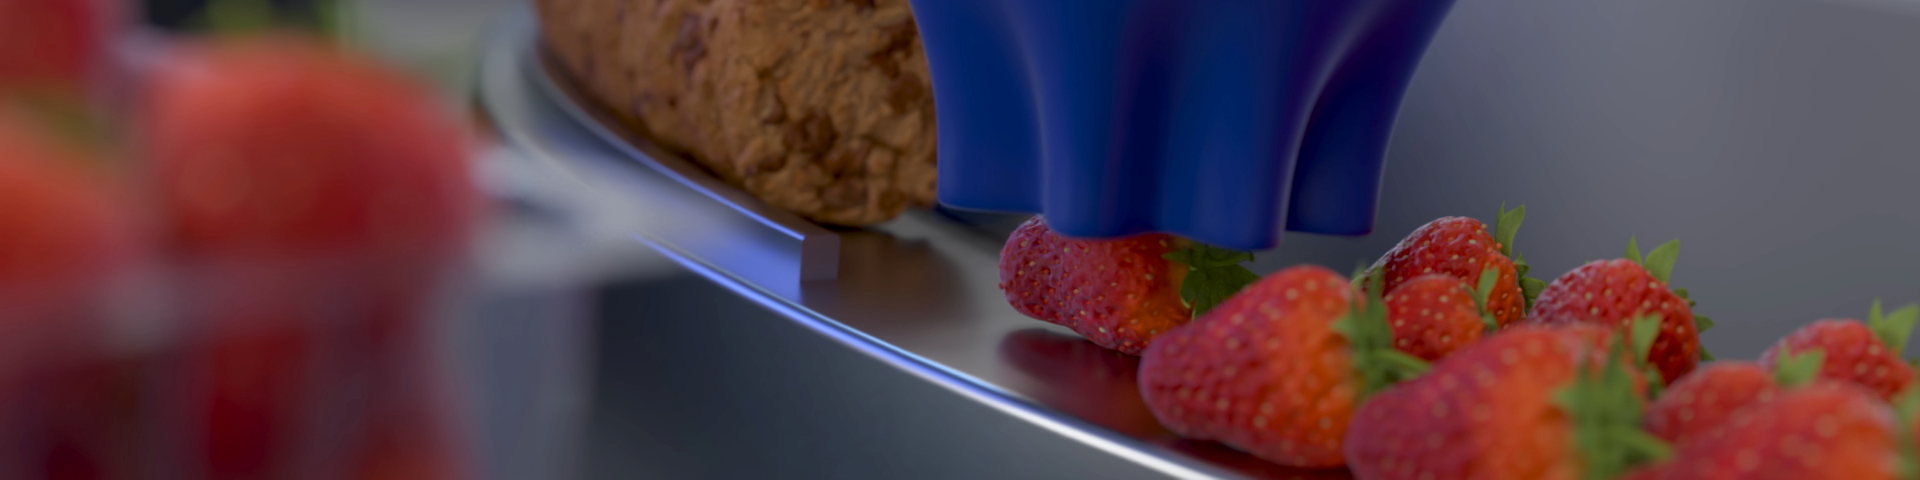 OnRobot soft grippers holding a strawberry